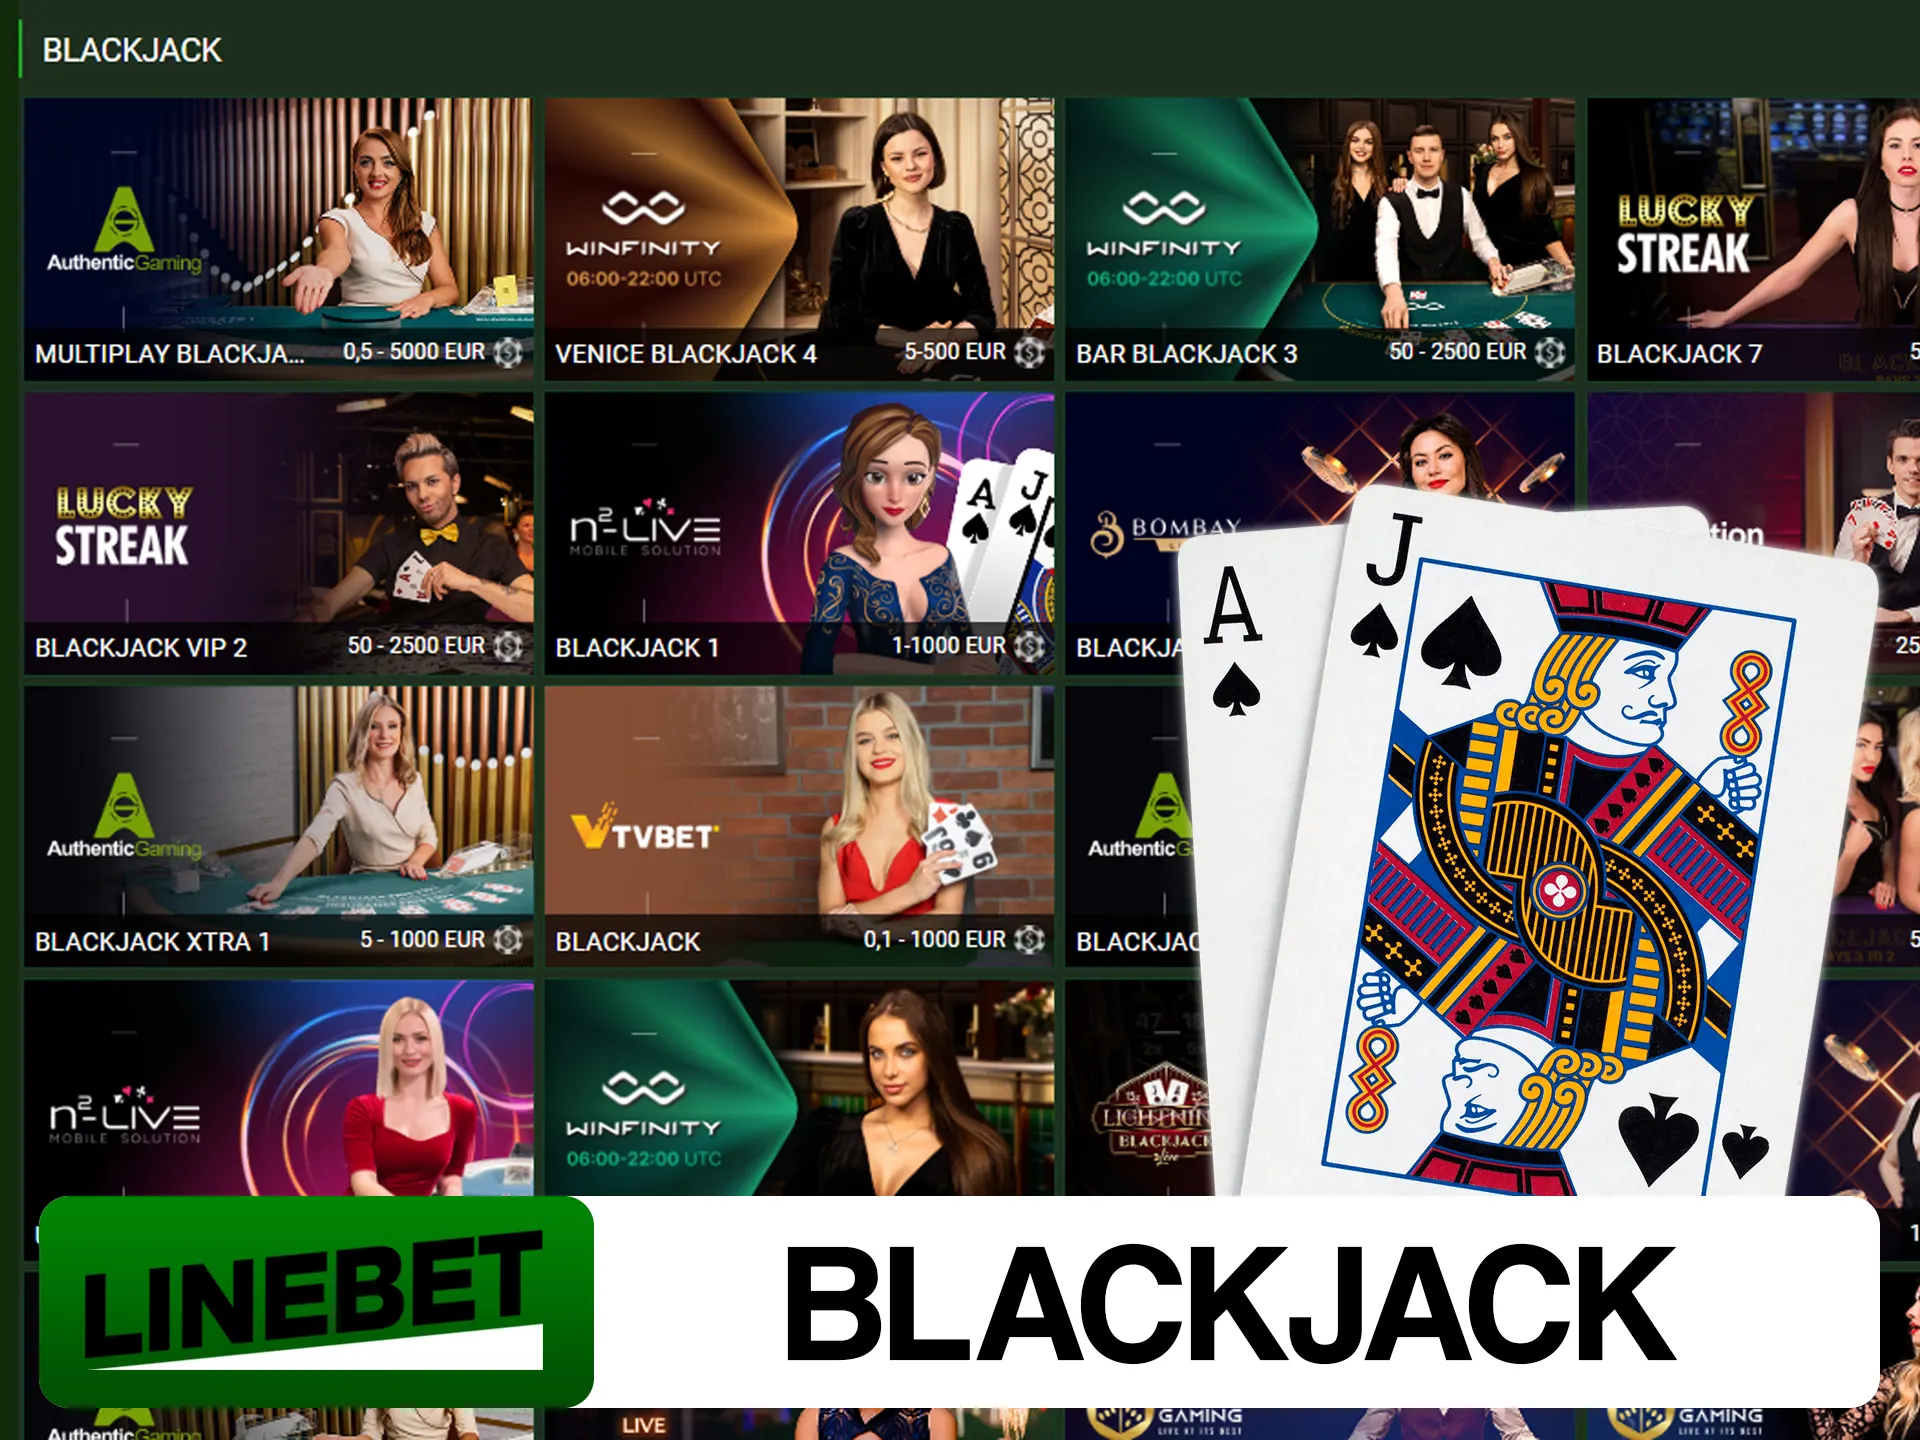 Play blackjack games at one table with real people at Linebet.